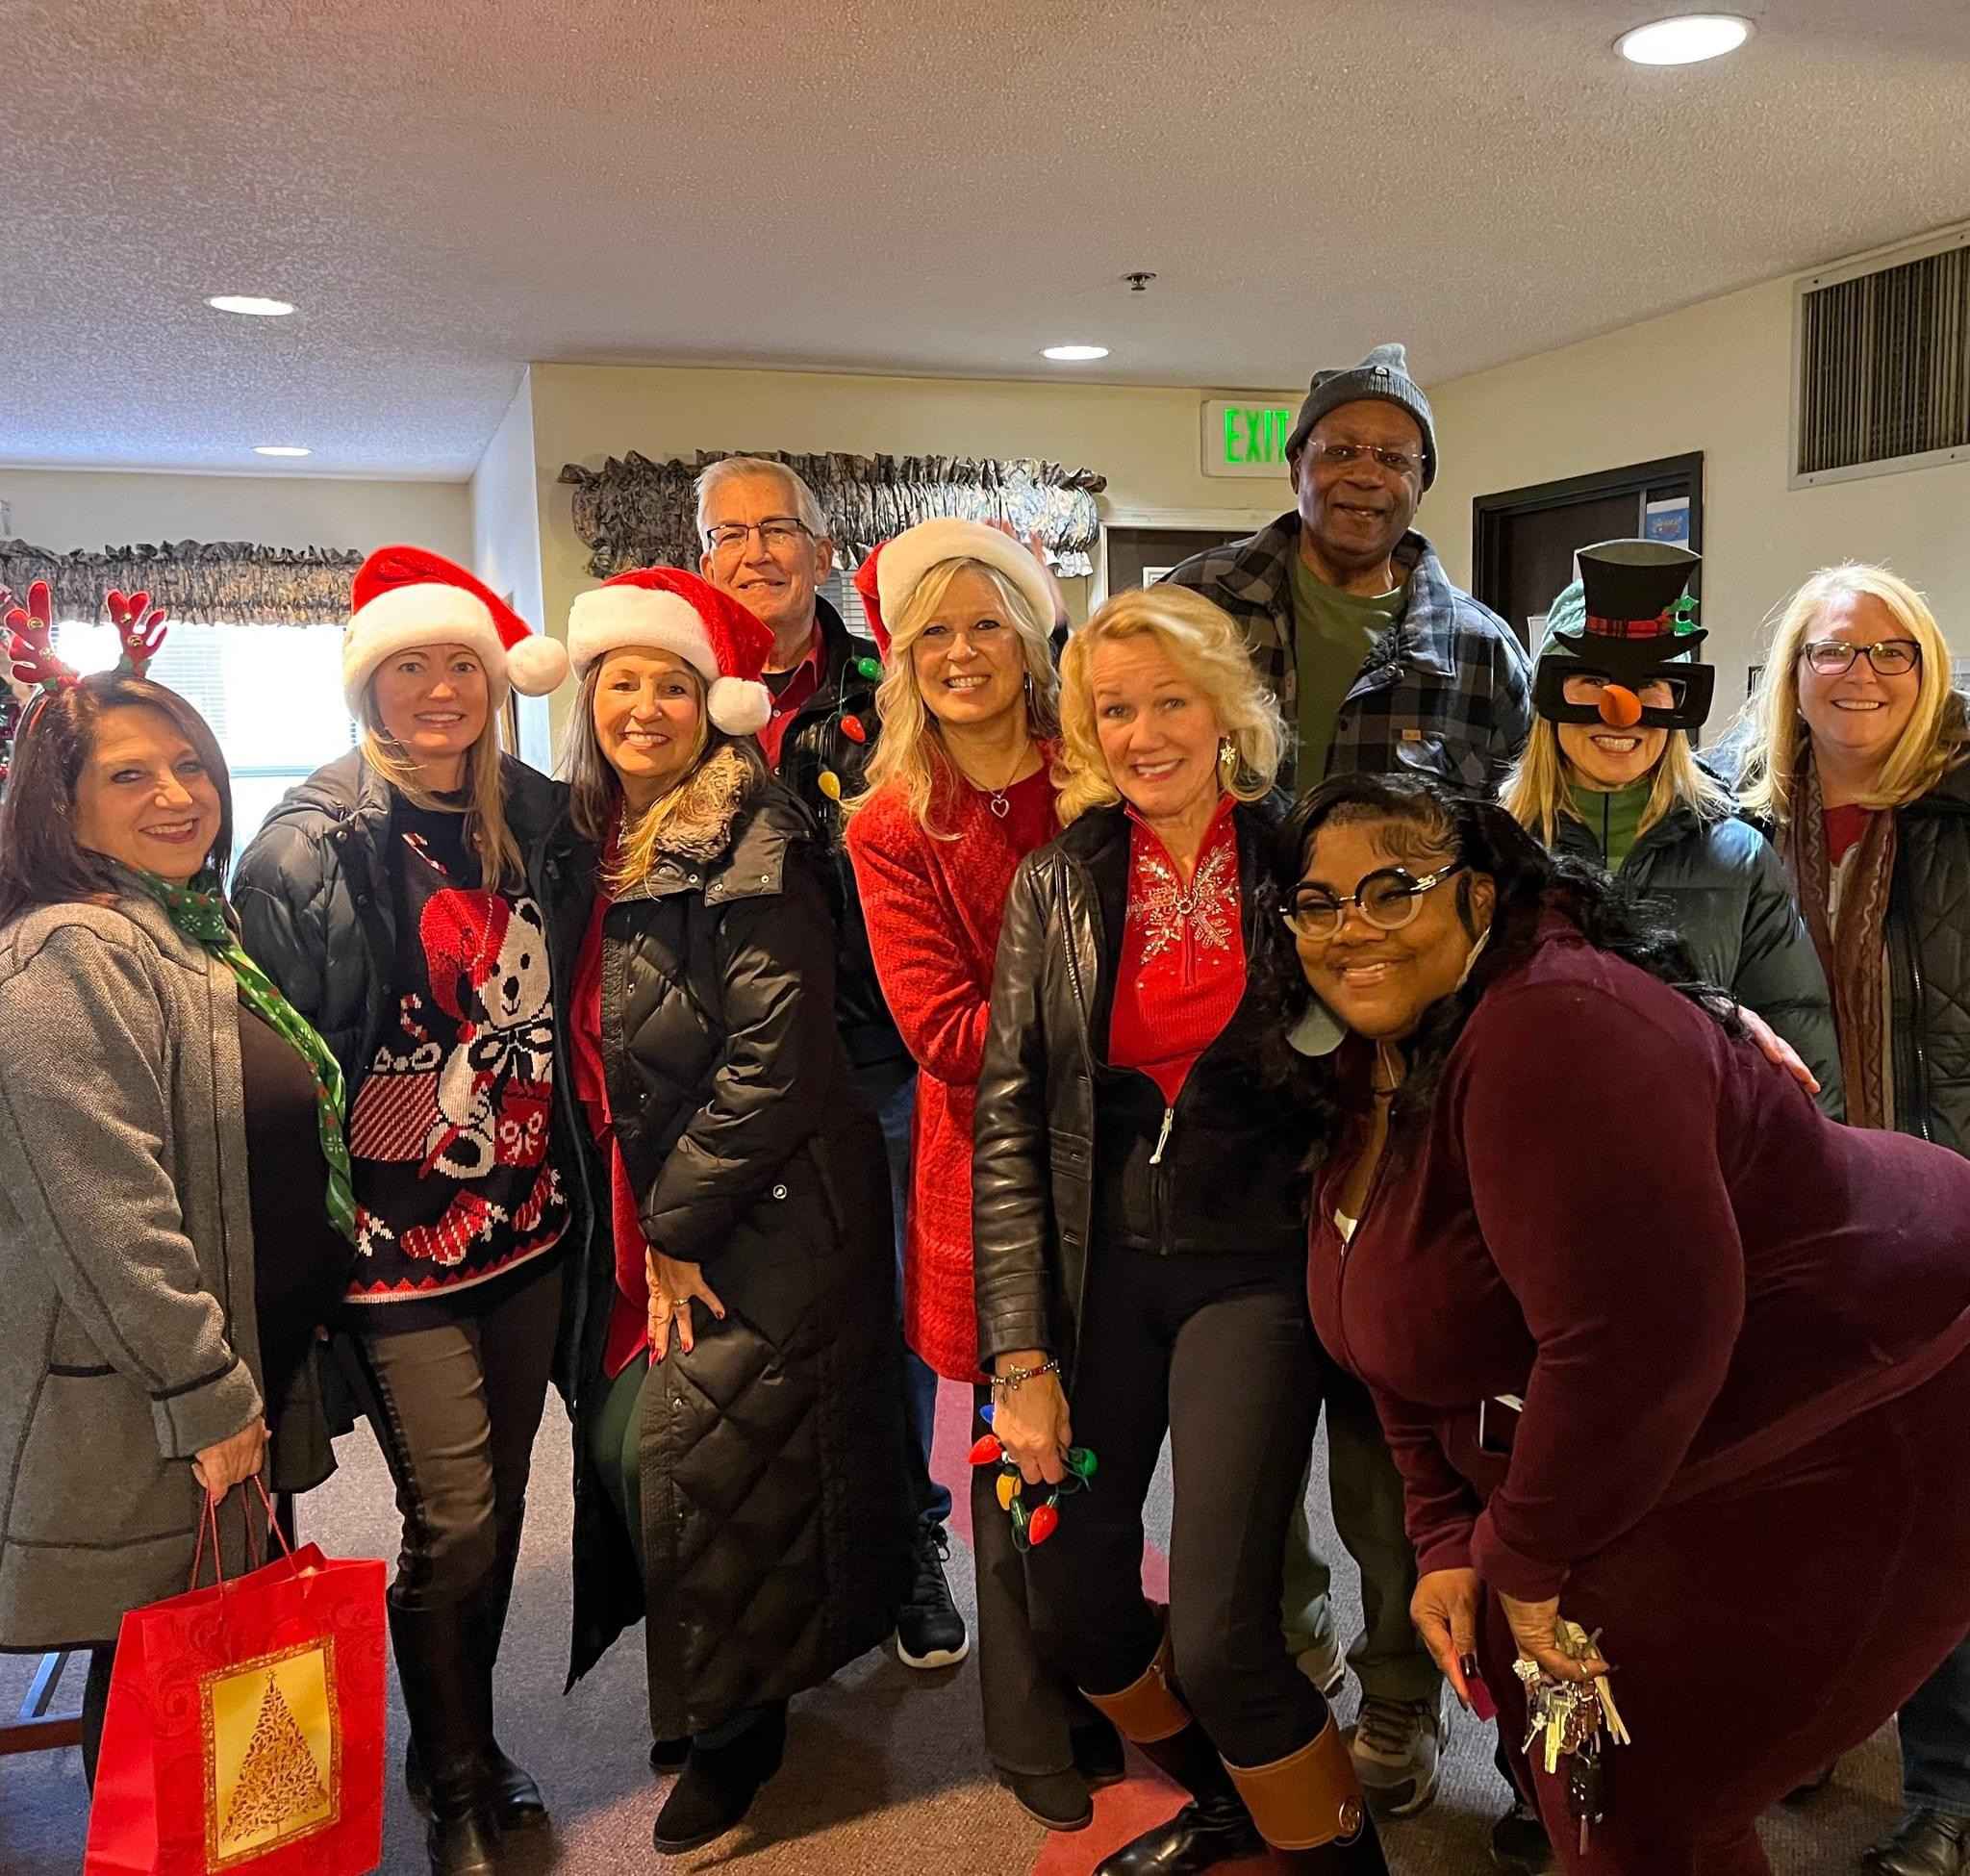 Rochester Hills nonprofit visits seniors with hopes of brightening their holiday season